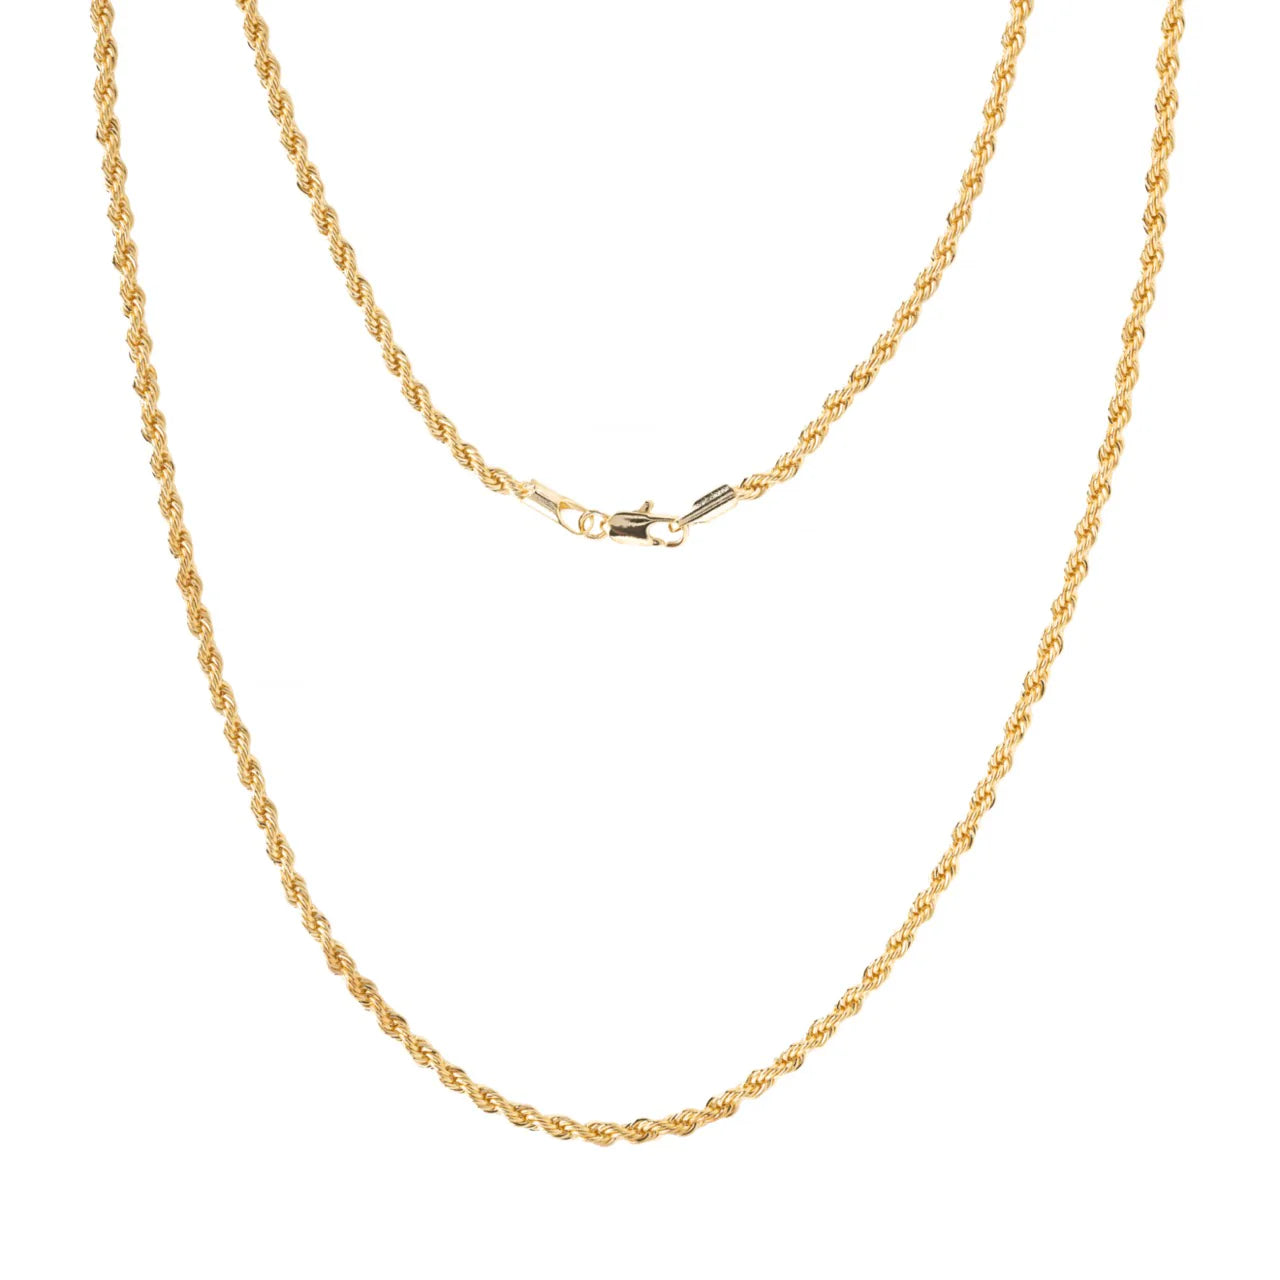 3MM GOLD ROPE CHAIN NECKLACE